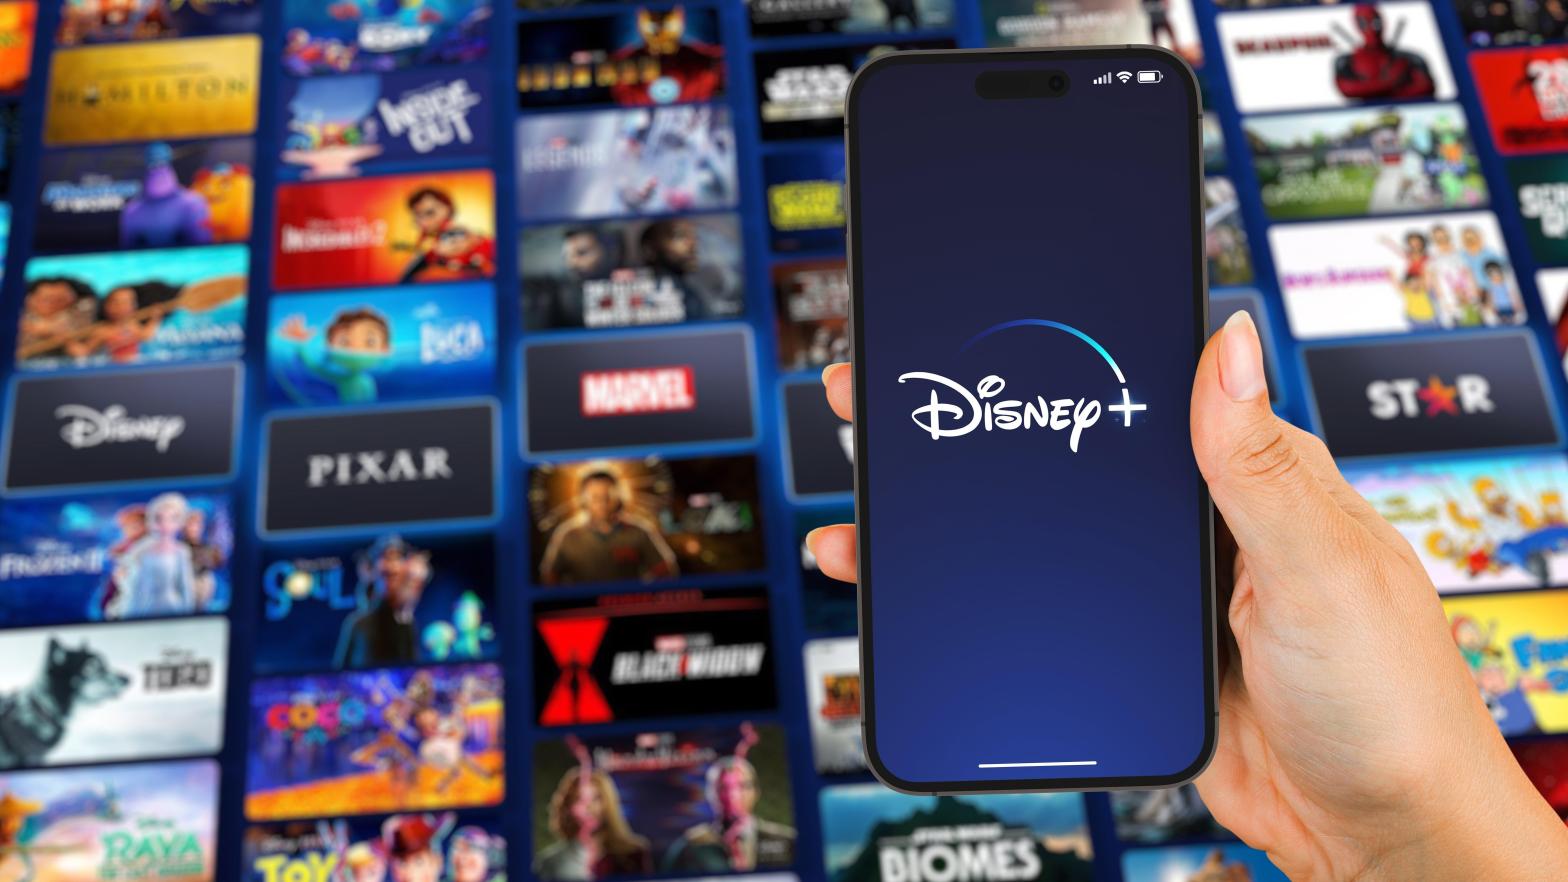 Disney+ lost subscribers for the first time since it rolled out in 2019. (Image: Diego Thomazini, Shutterstock)